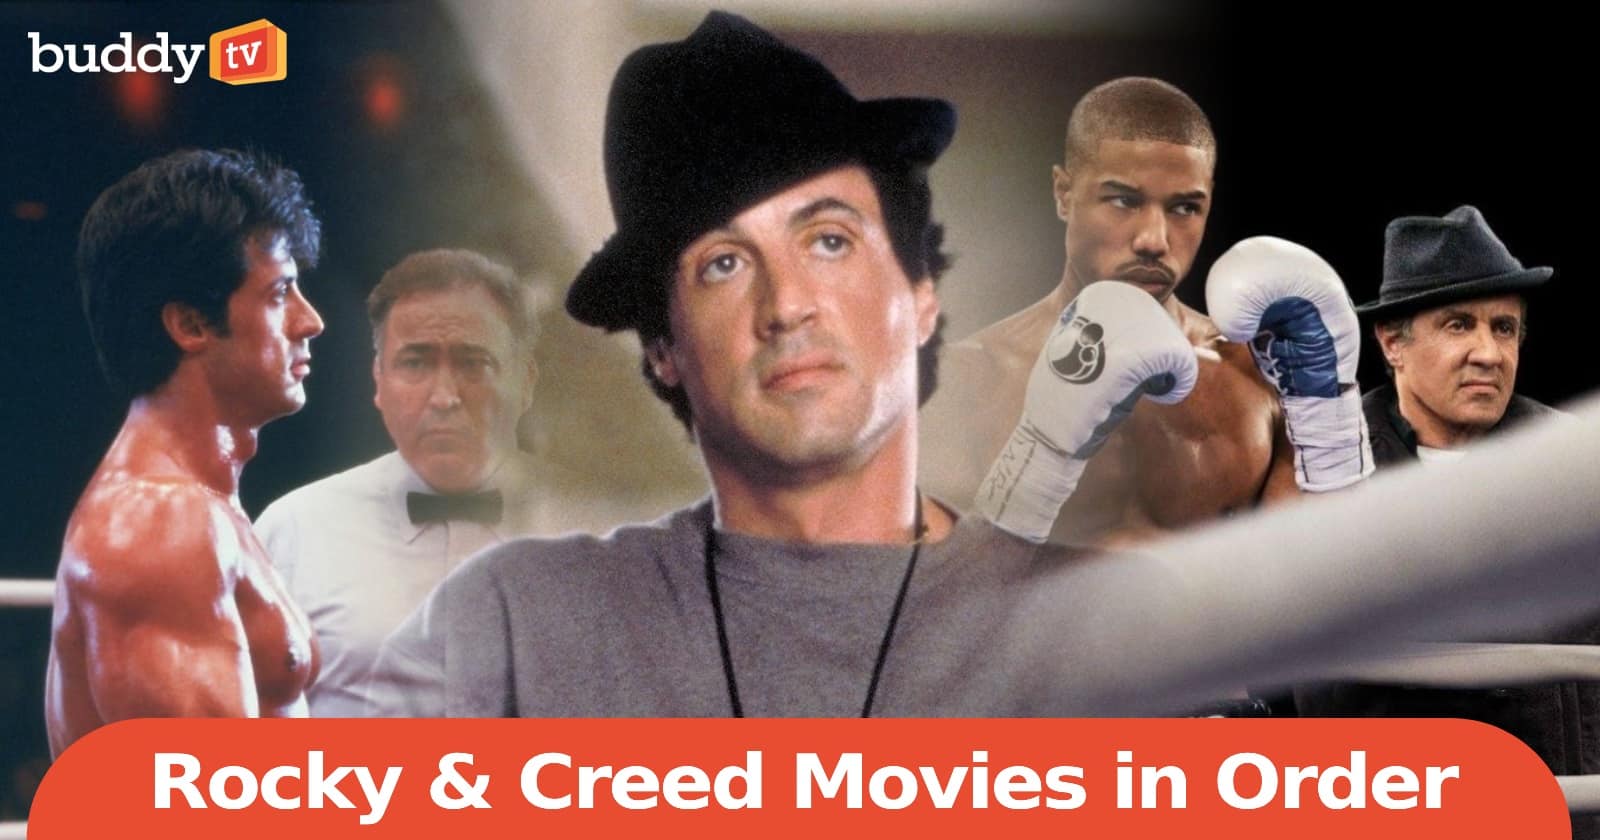 Rocky and Creed Movies in Order: How to Watch the Franchise